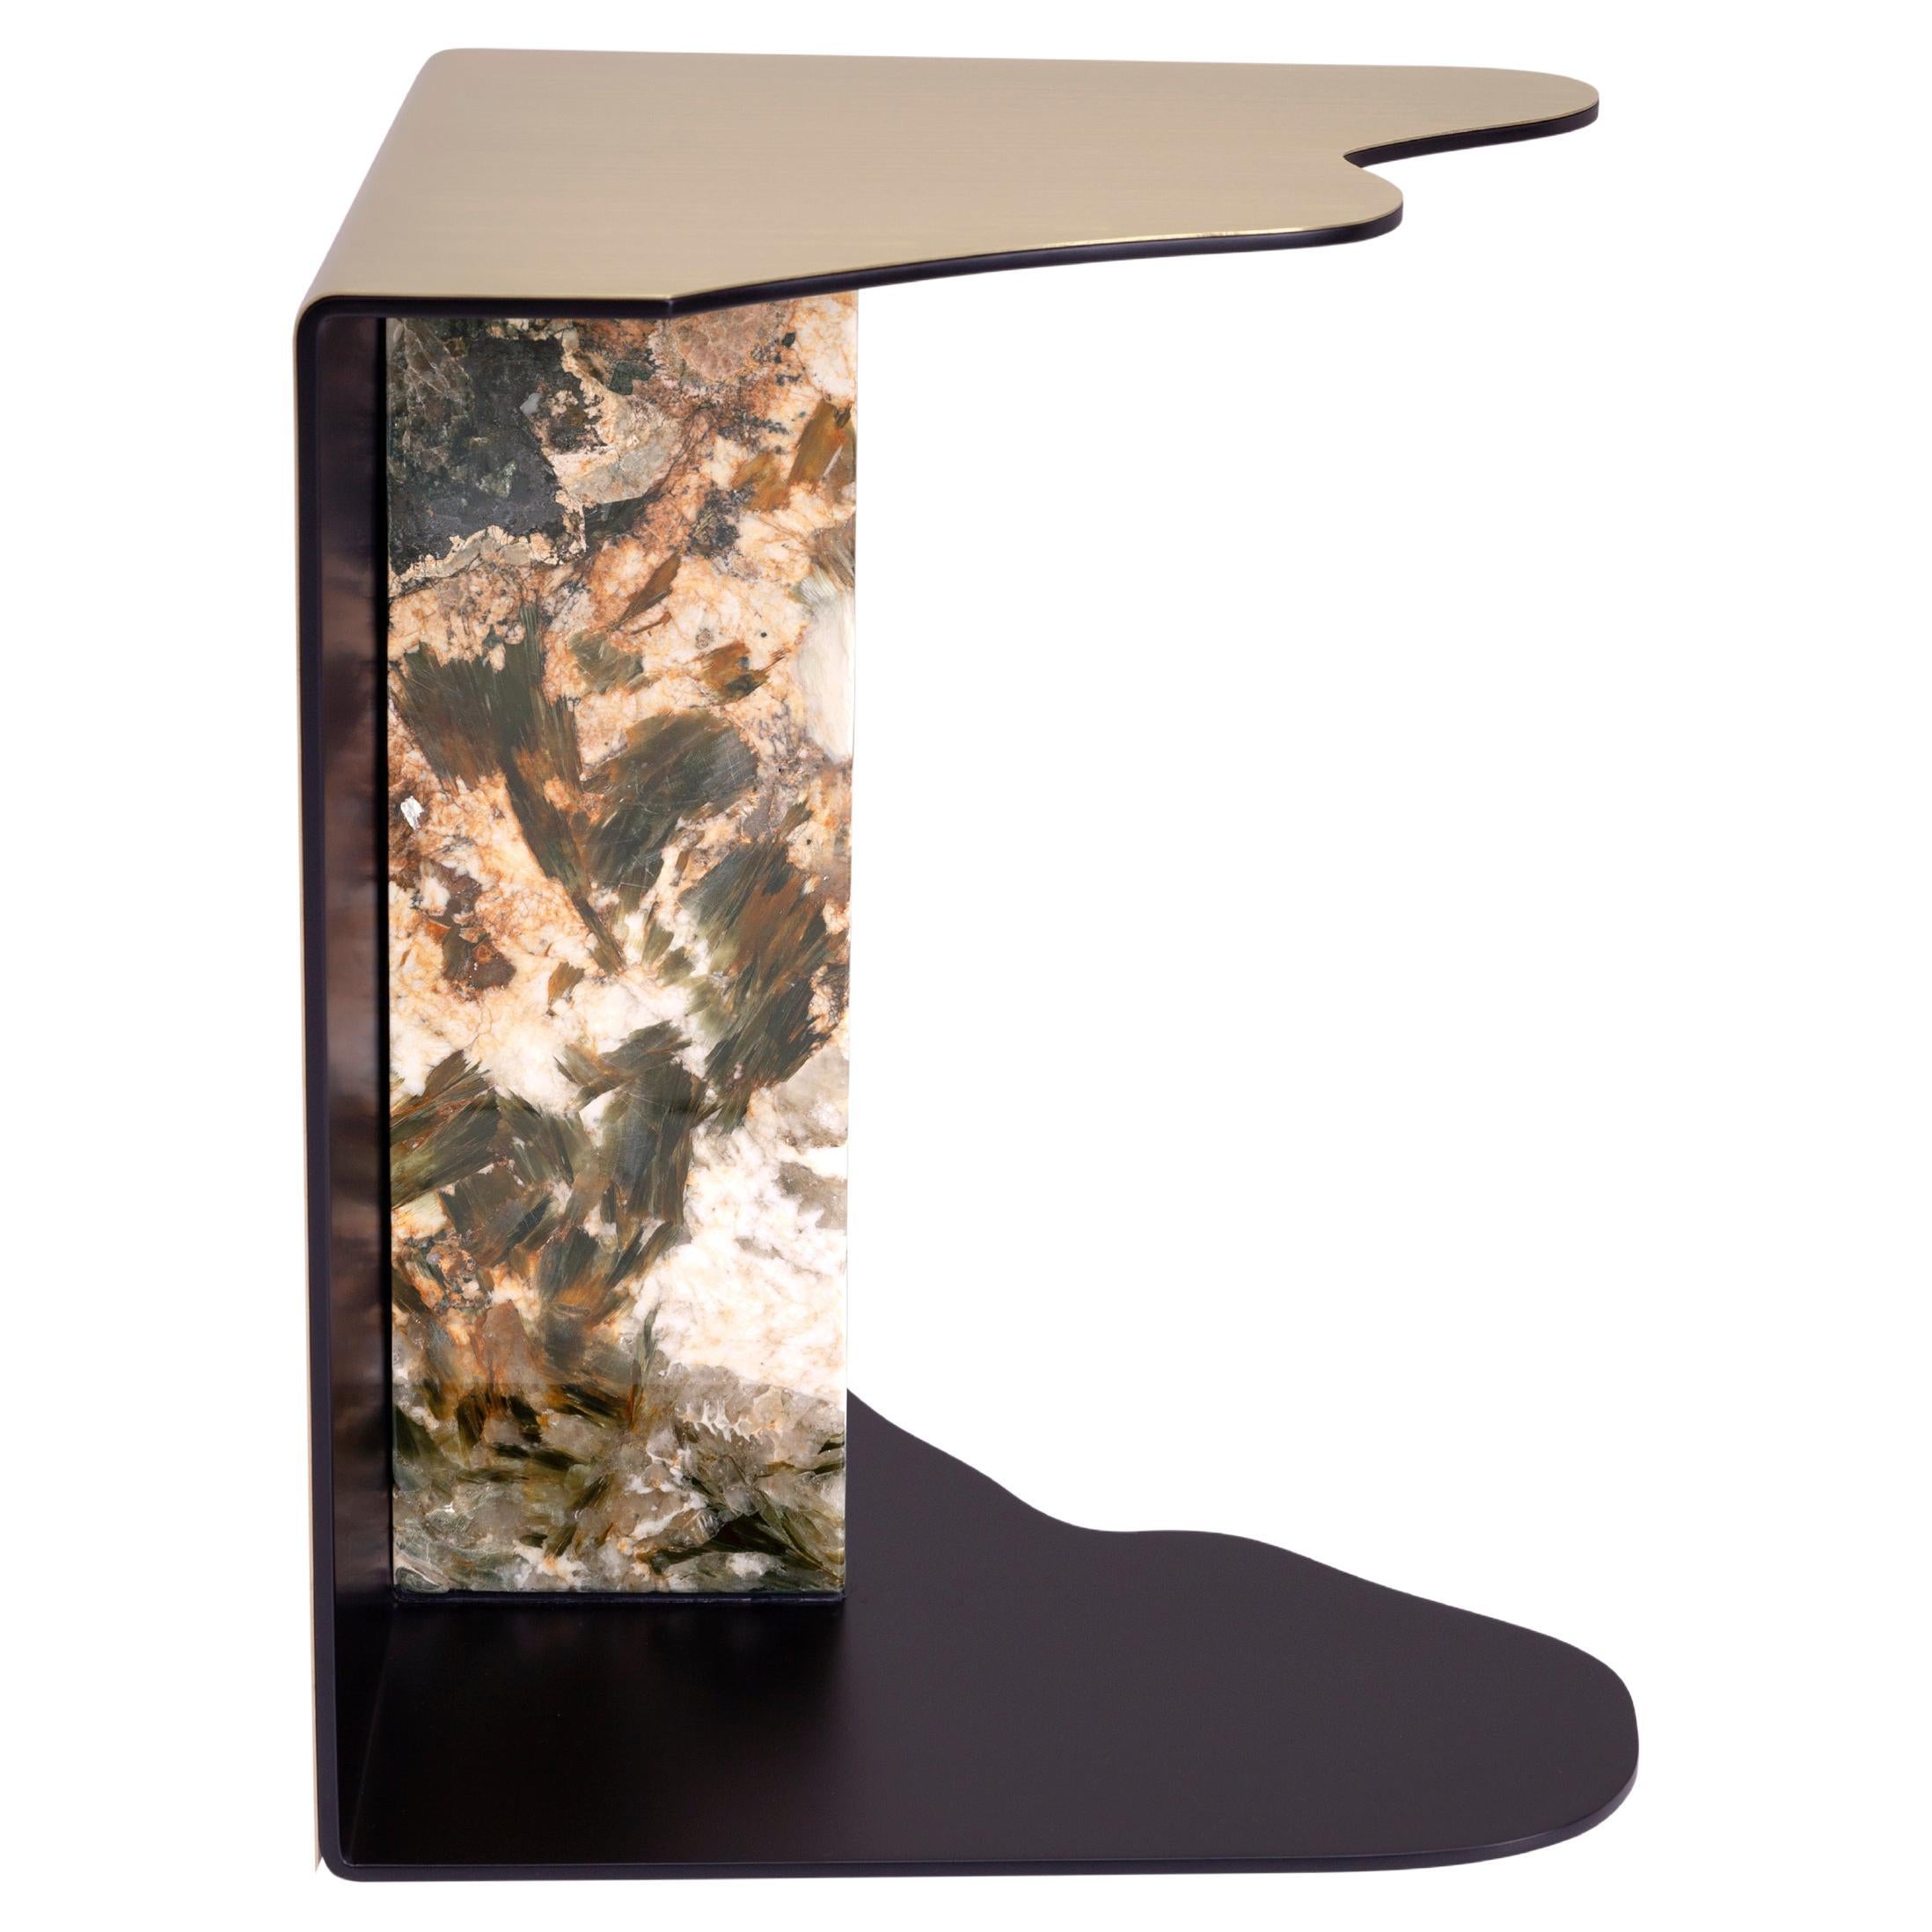 Modern Raw Table, Patagonia Granite, Handmade in Portugal by Greenapple For at | raw granite for sale